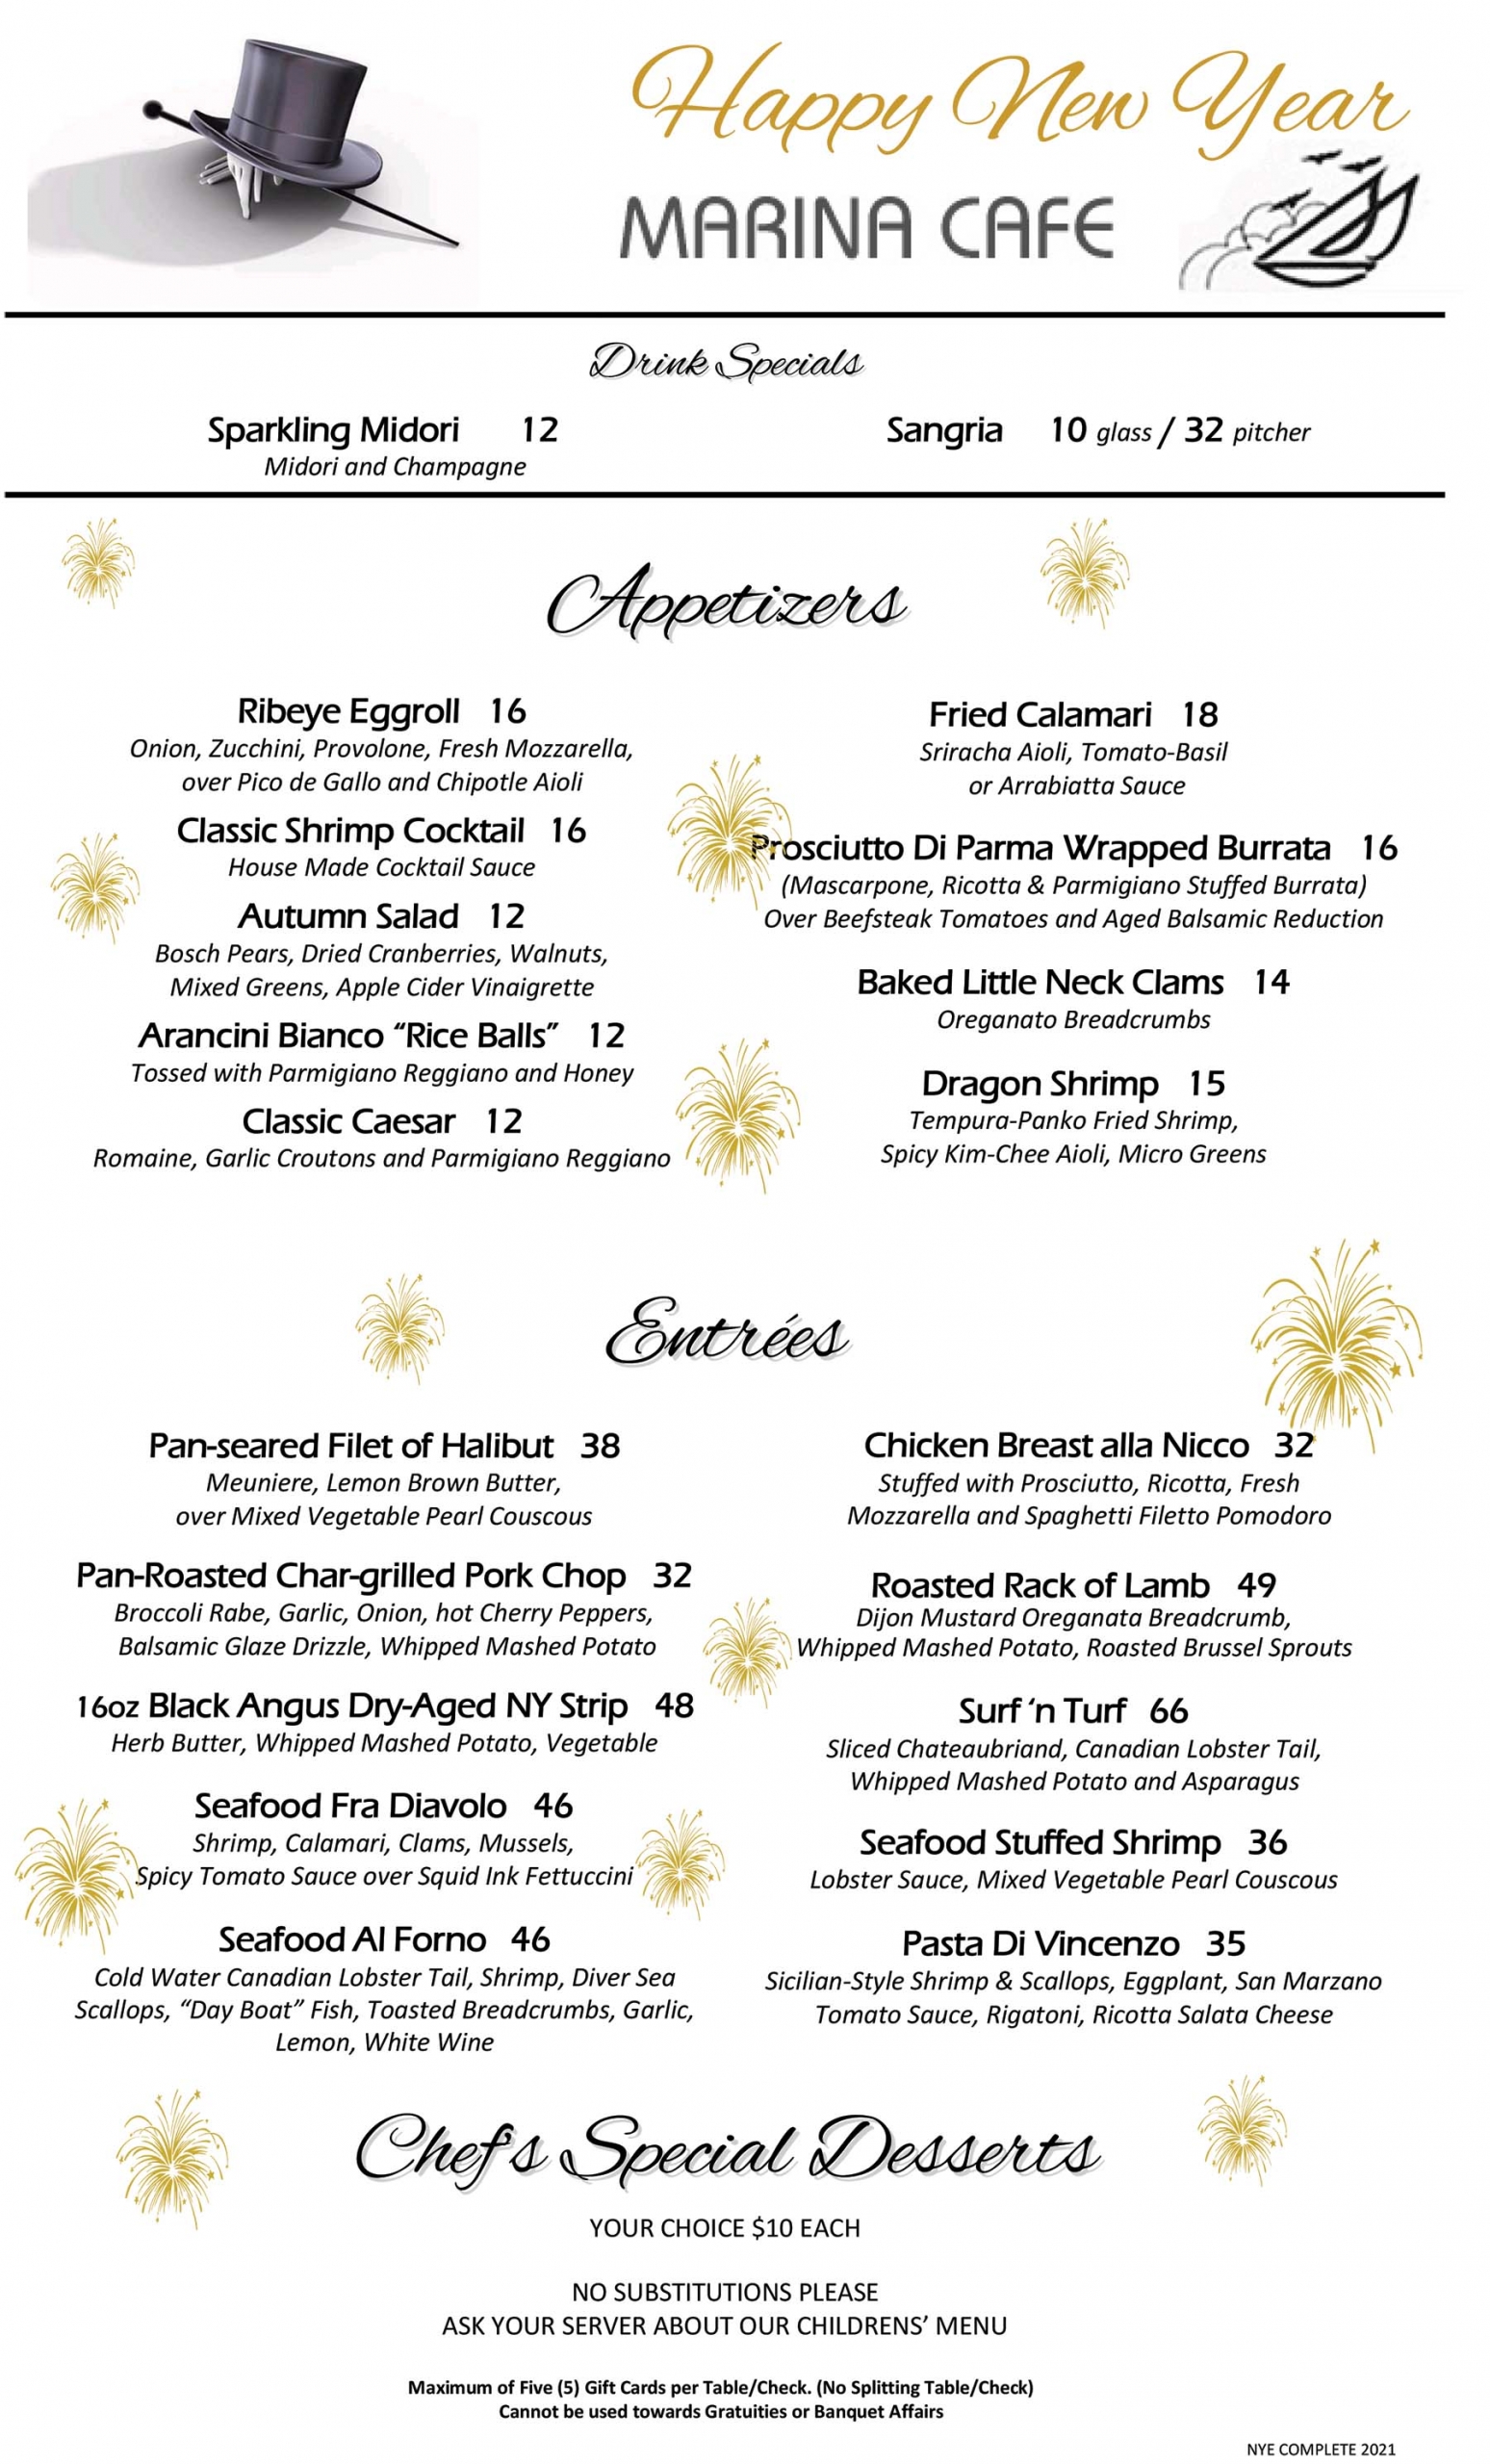 Marina Cafe's New Year's Eve Lunch and Dinner Menu 2021